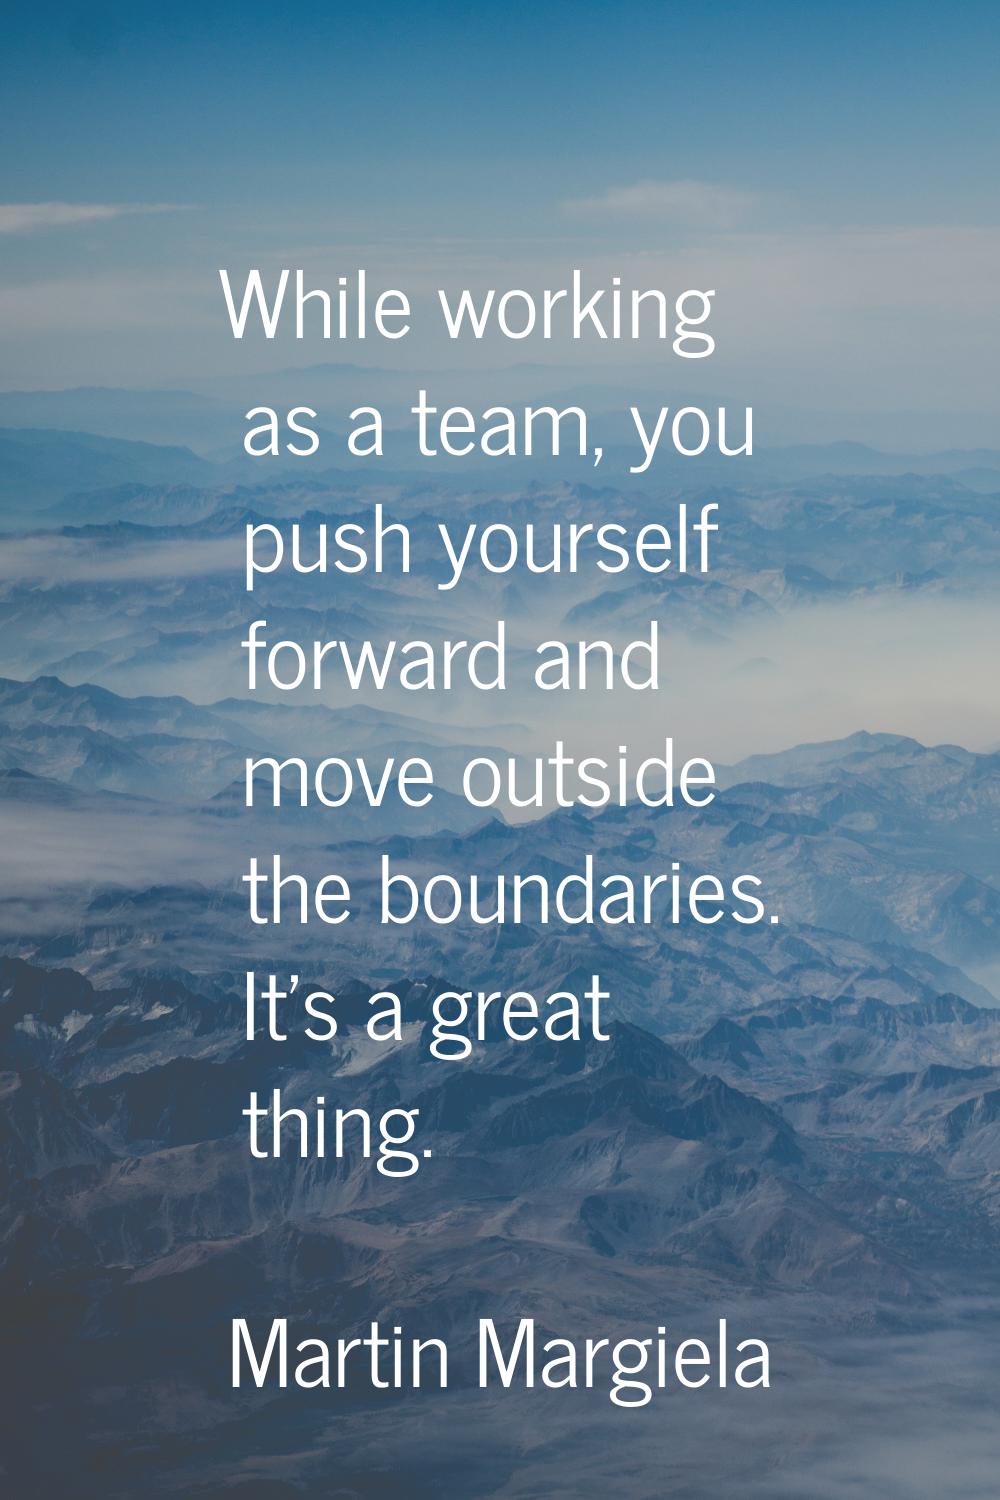 While working as a team, you push yourself forward and move outside the boundaries. It's a great th